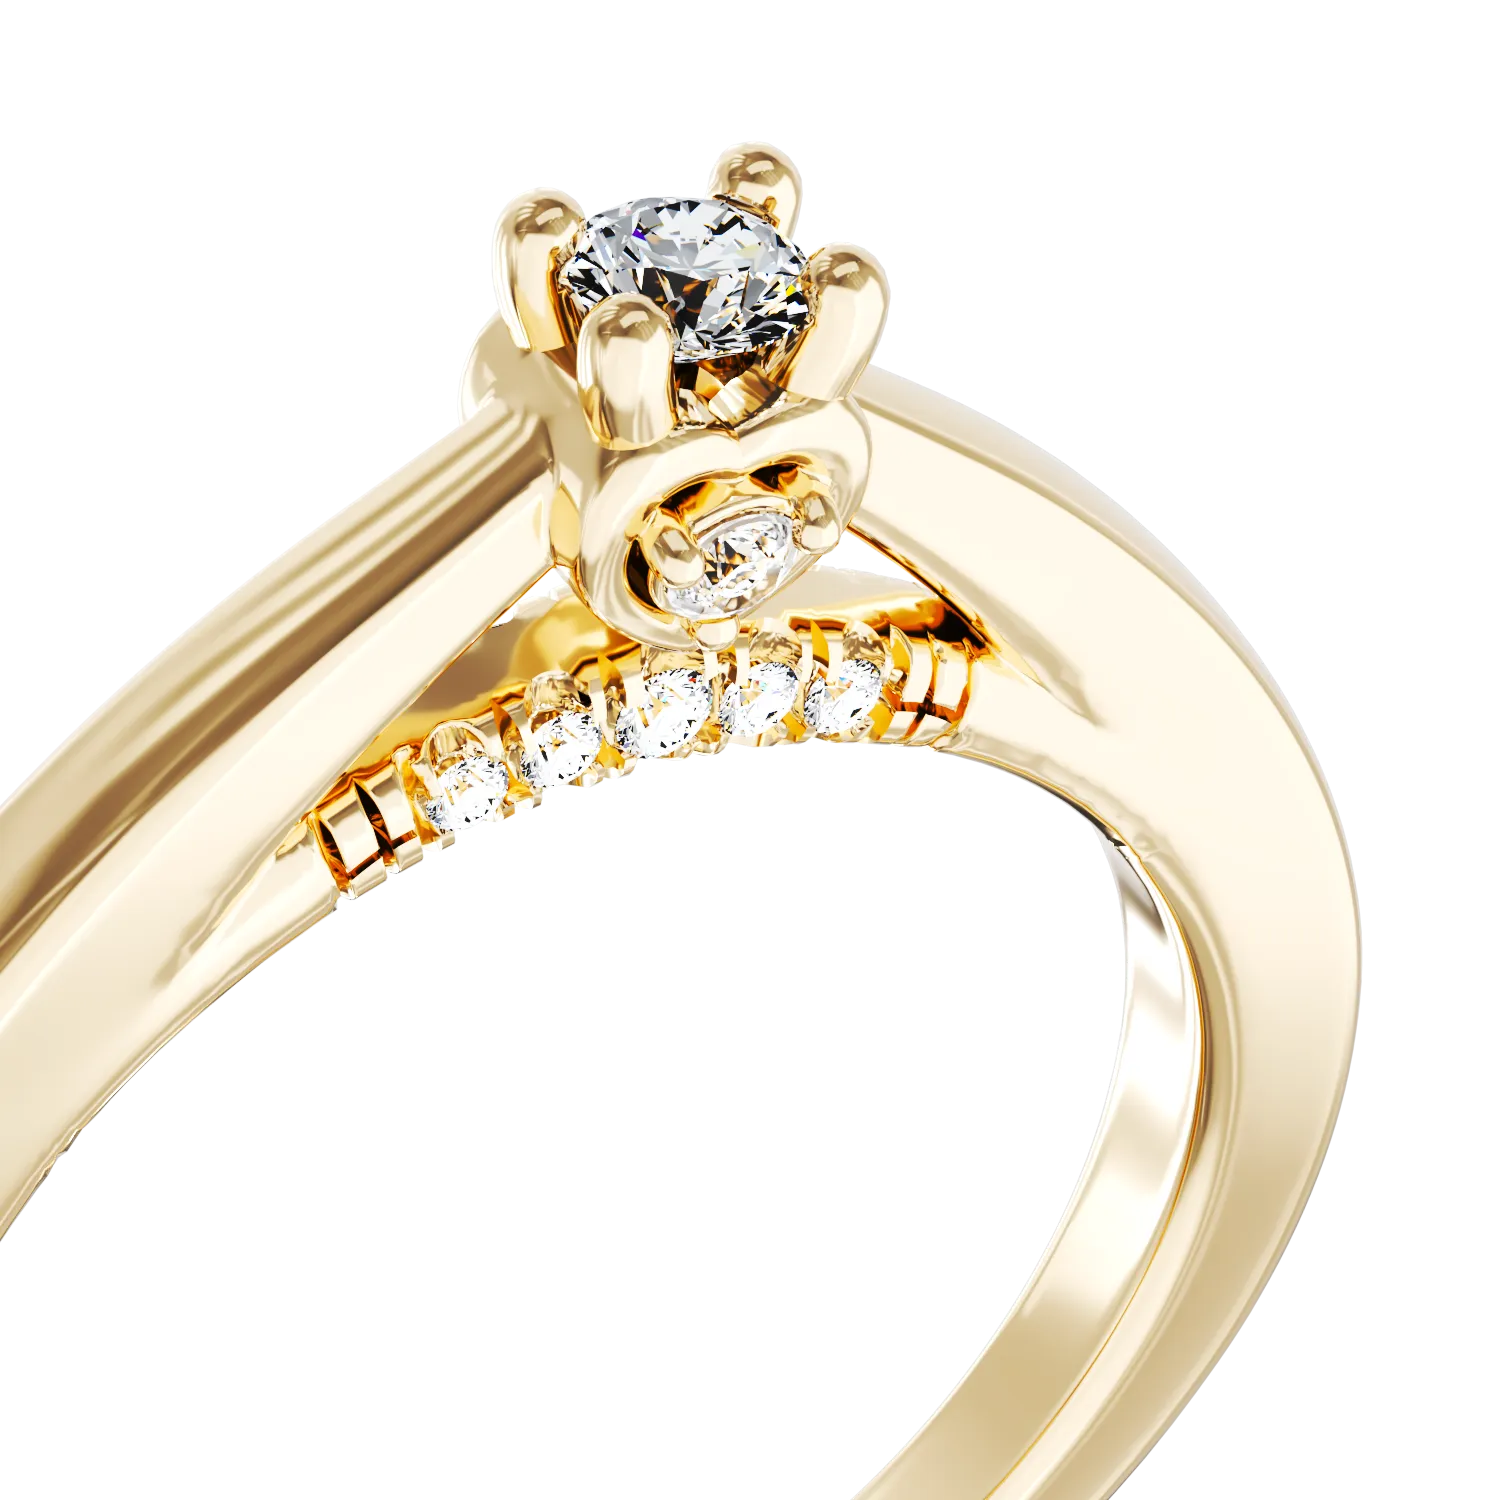 18K yellow gold engagement ring with 0.12ct diamond and 0.05ct diamonds